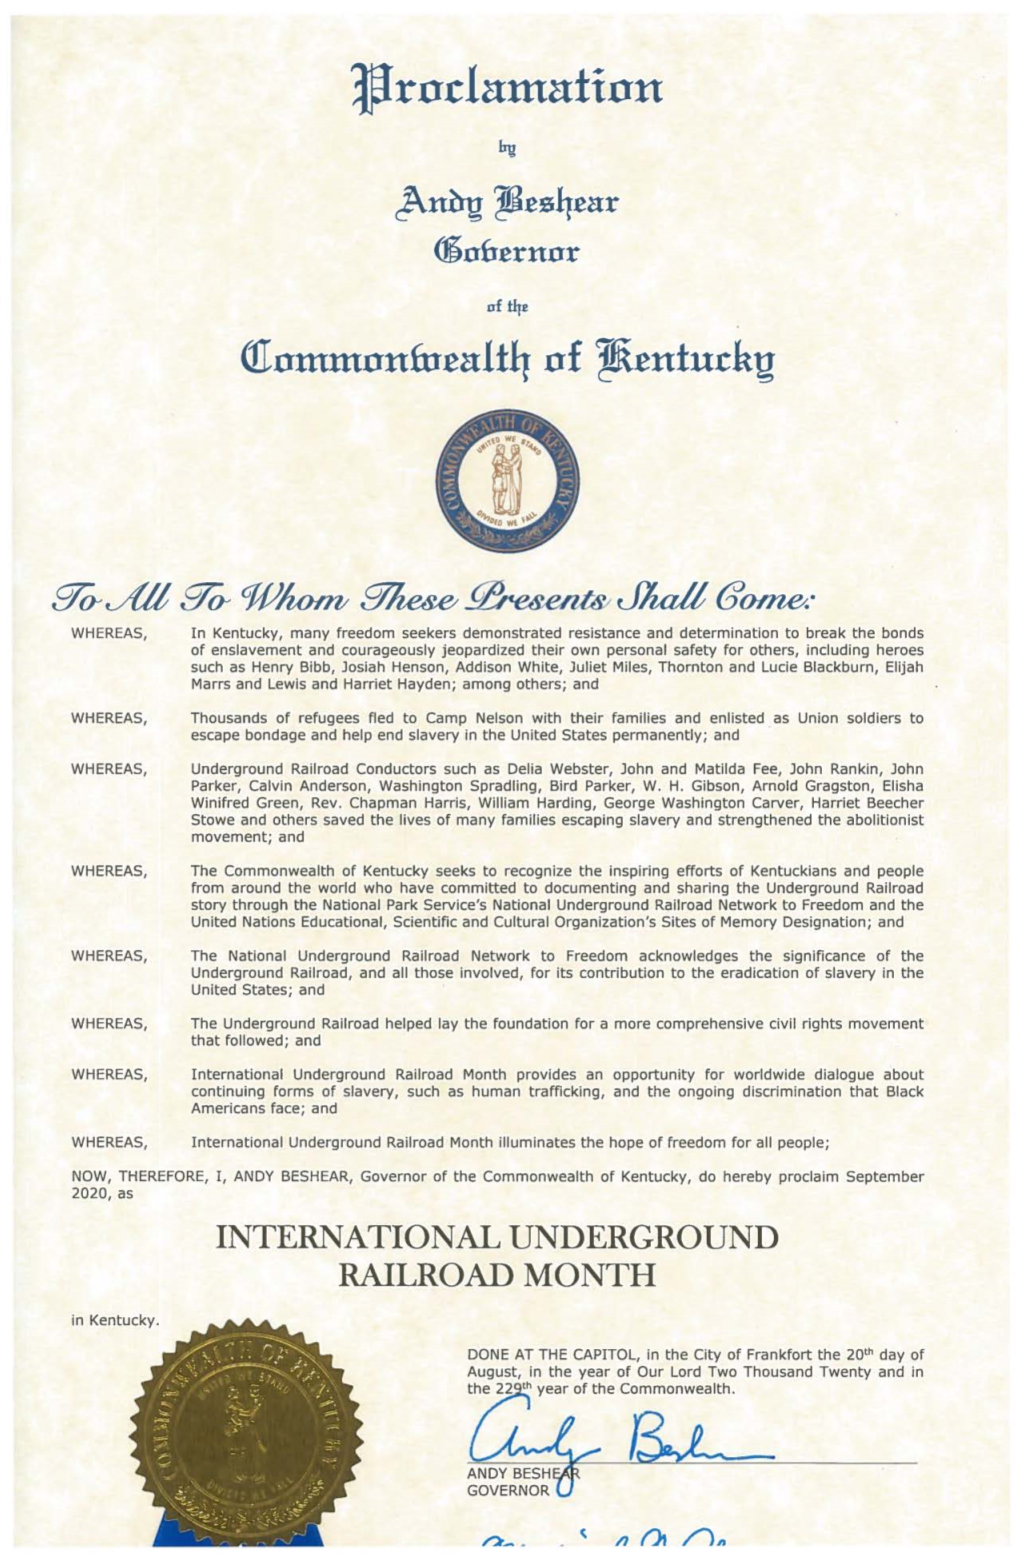 Proclamation by Andy Beshear Governor of the Commonwealth of Kentucky